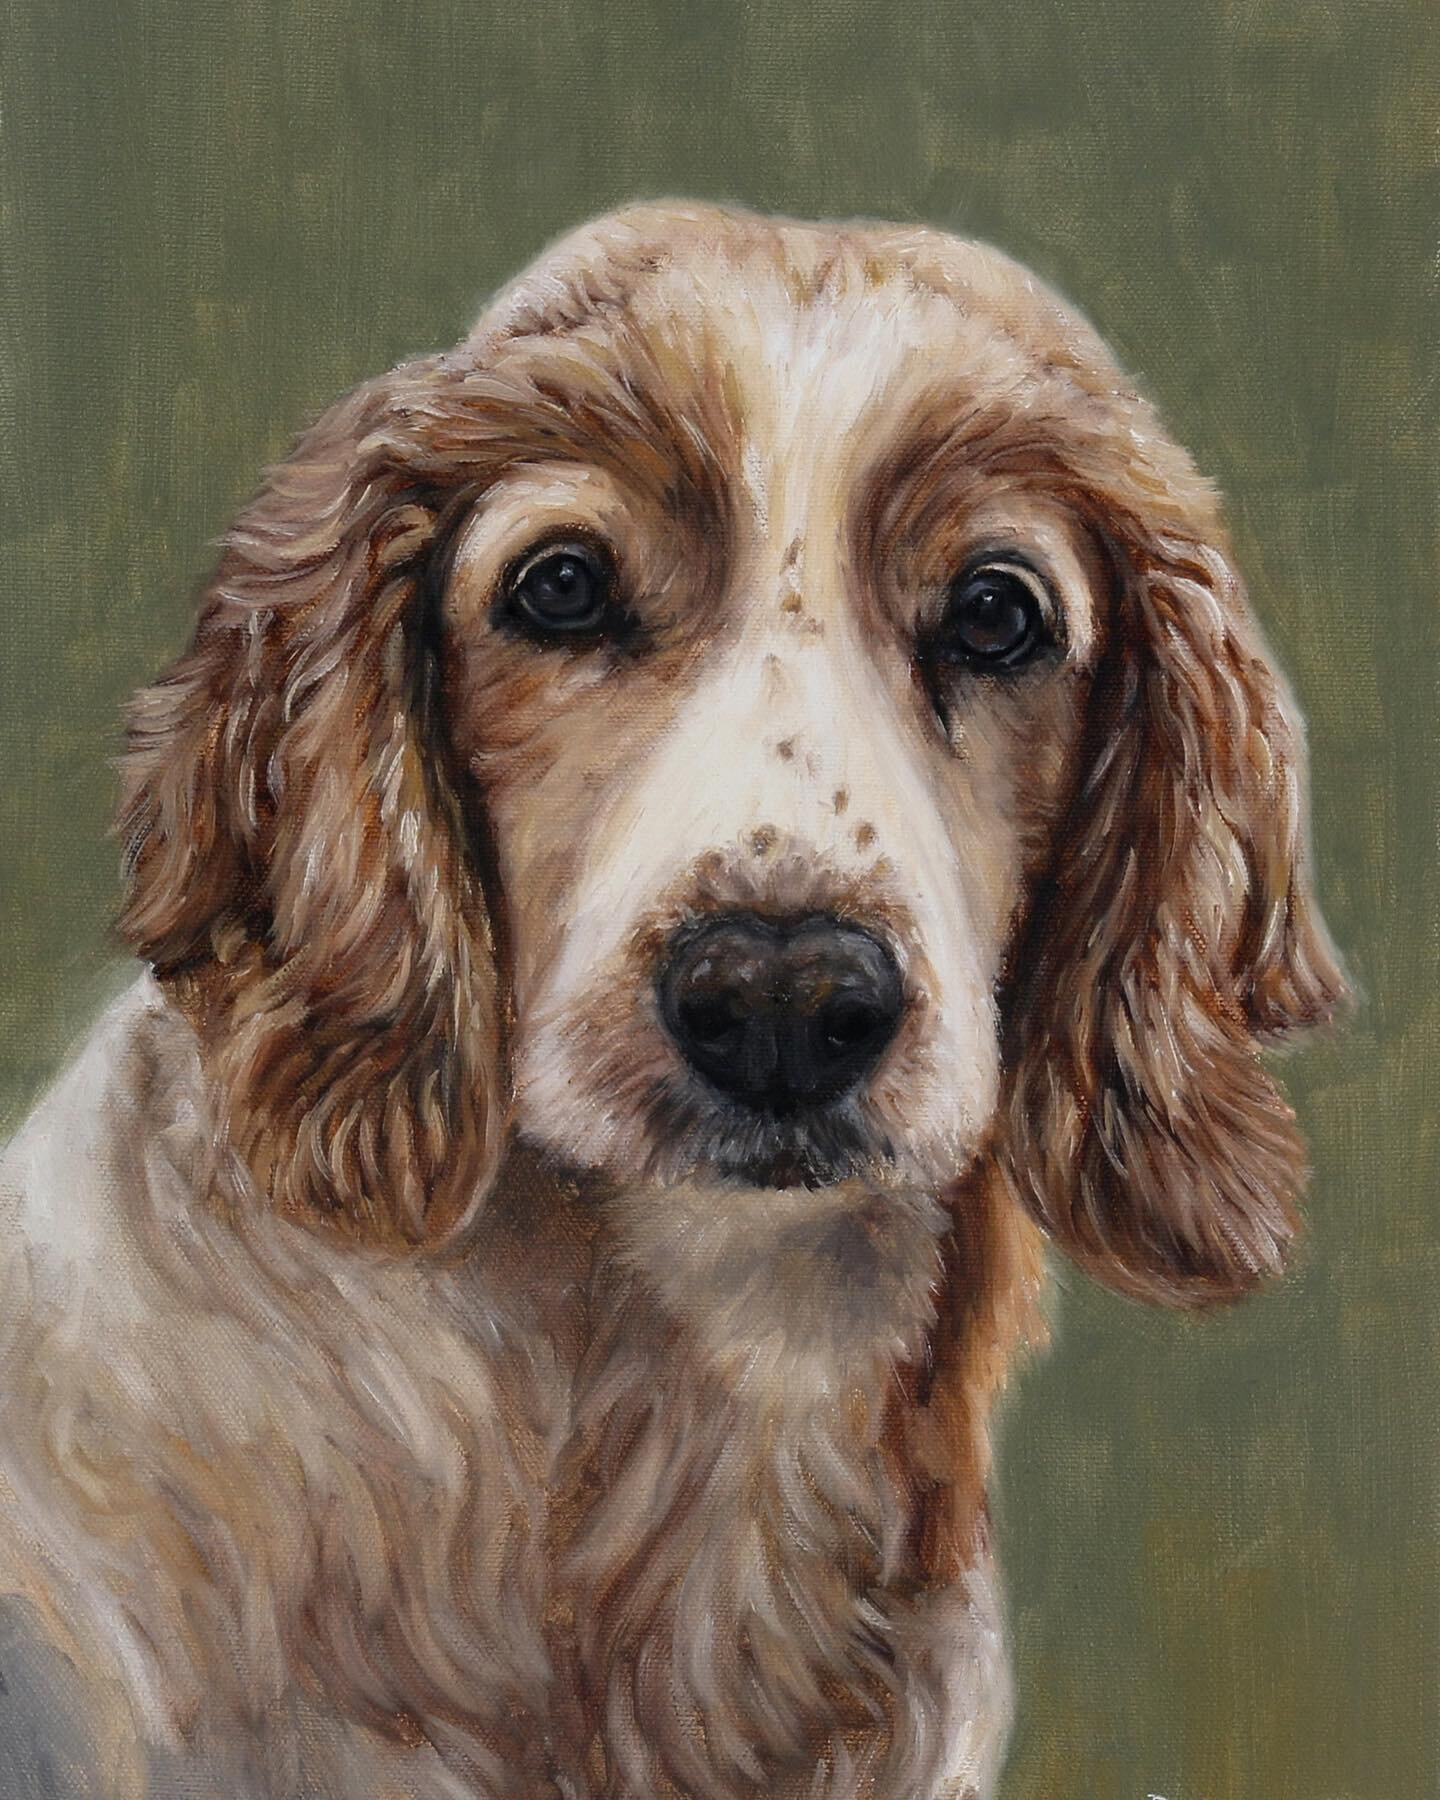 A beautiful spaniel commission 🎨 

#oilpainting #dogpainting #petportrait #dogportrait #commission #smallbusinessuk #detail #dog #petpainting #spaniel #petcommission #petsofinstagram #oilpaintings #animalartwork #artwork #art #artist #artofinstagram